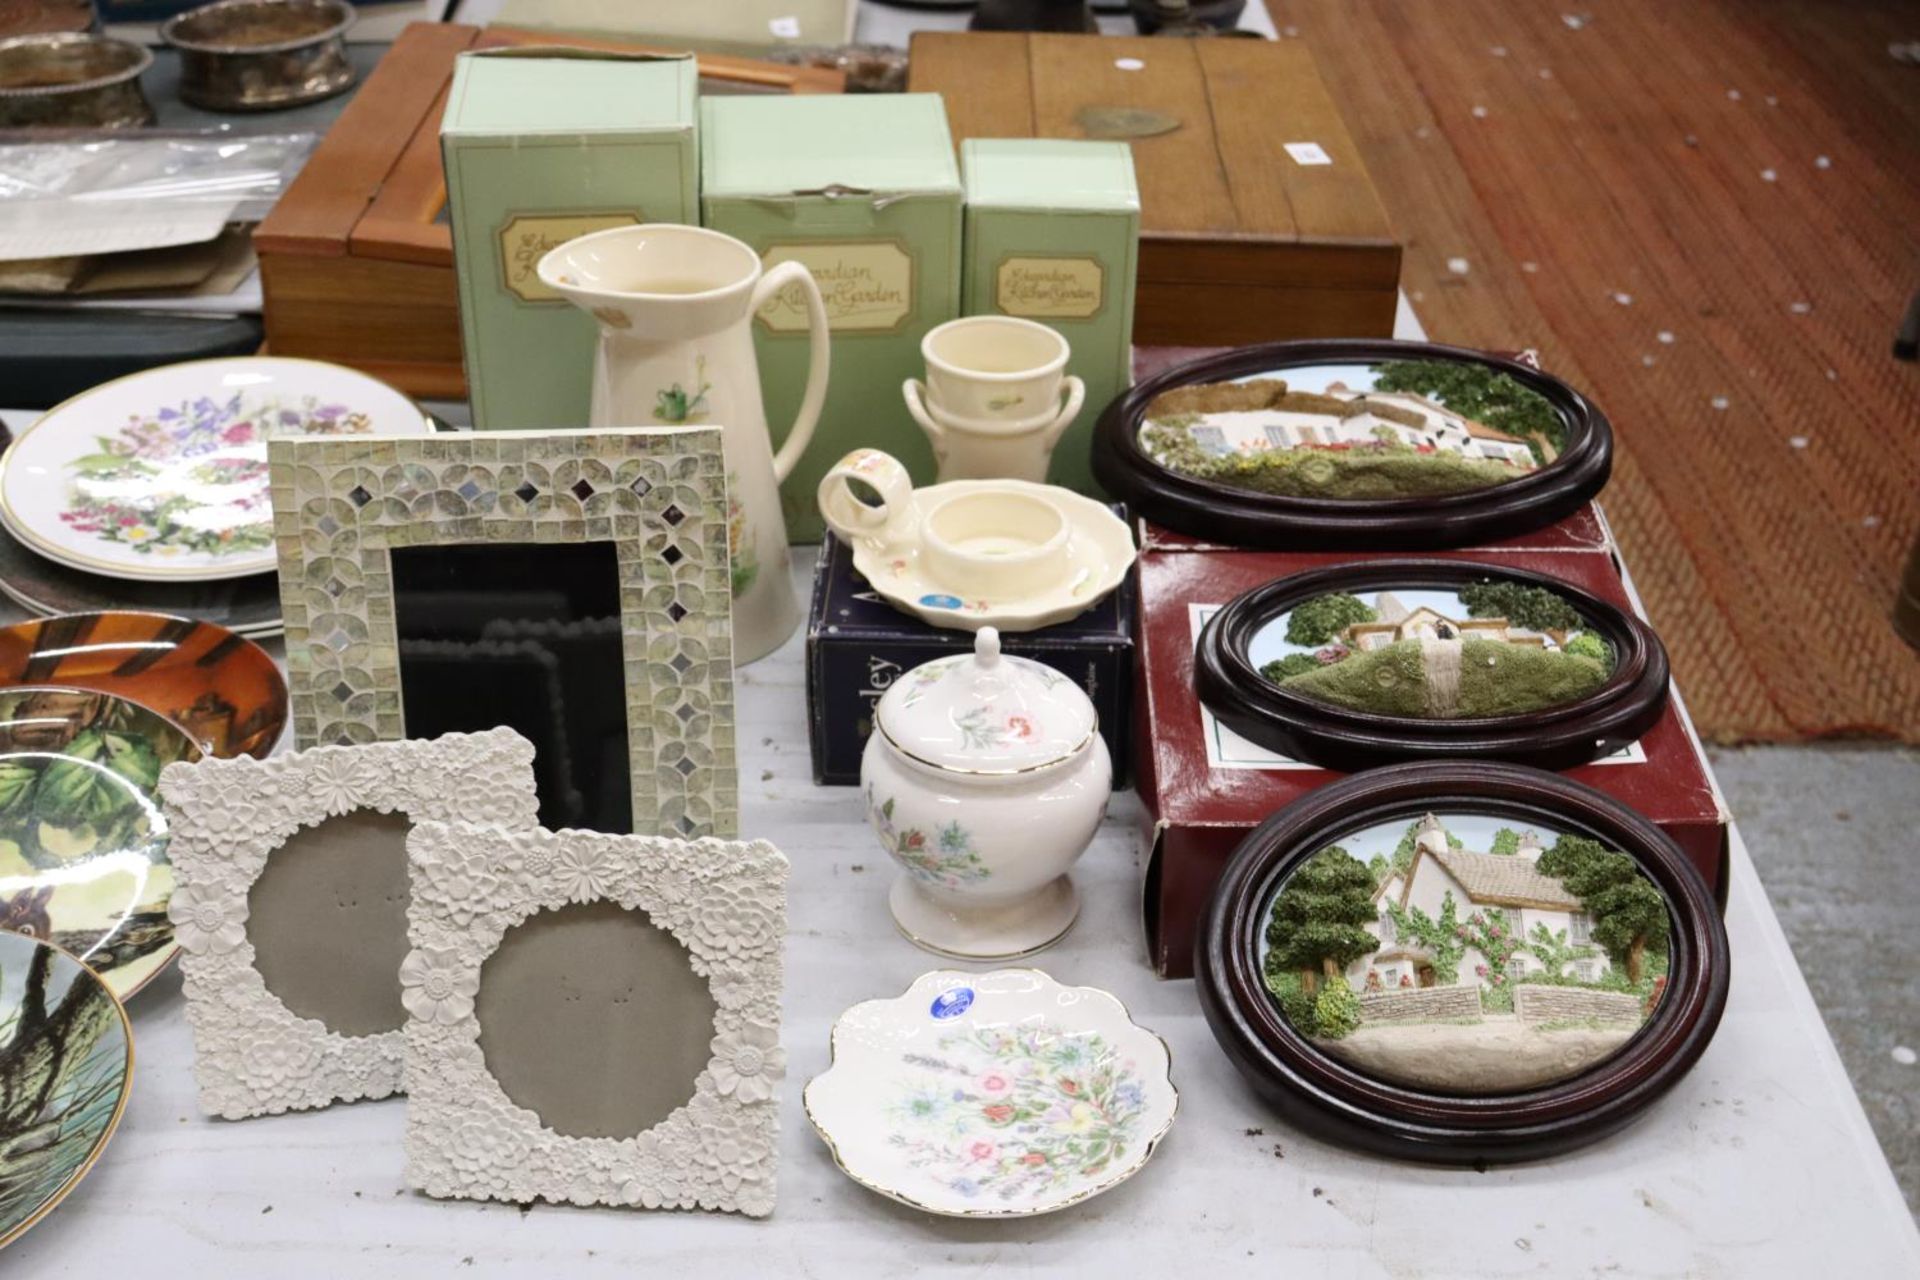 A QUANTITY OF CERAMIC ITEMS, MOSTLY BOXED TO INCLUDE AYNSLEY EDWARDIAN KITCHEN GARDEN, JUG, VASE AND